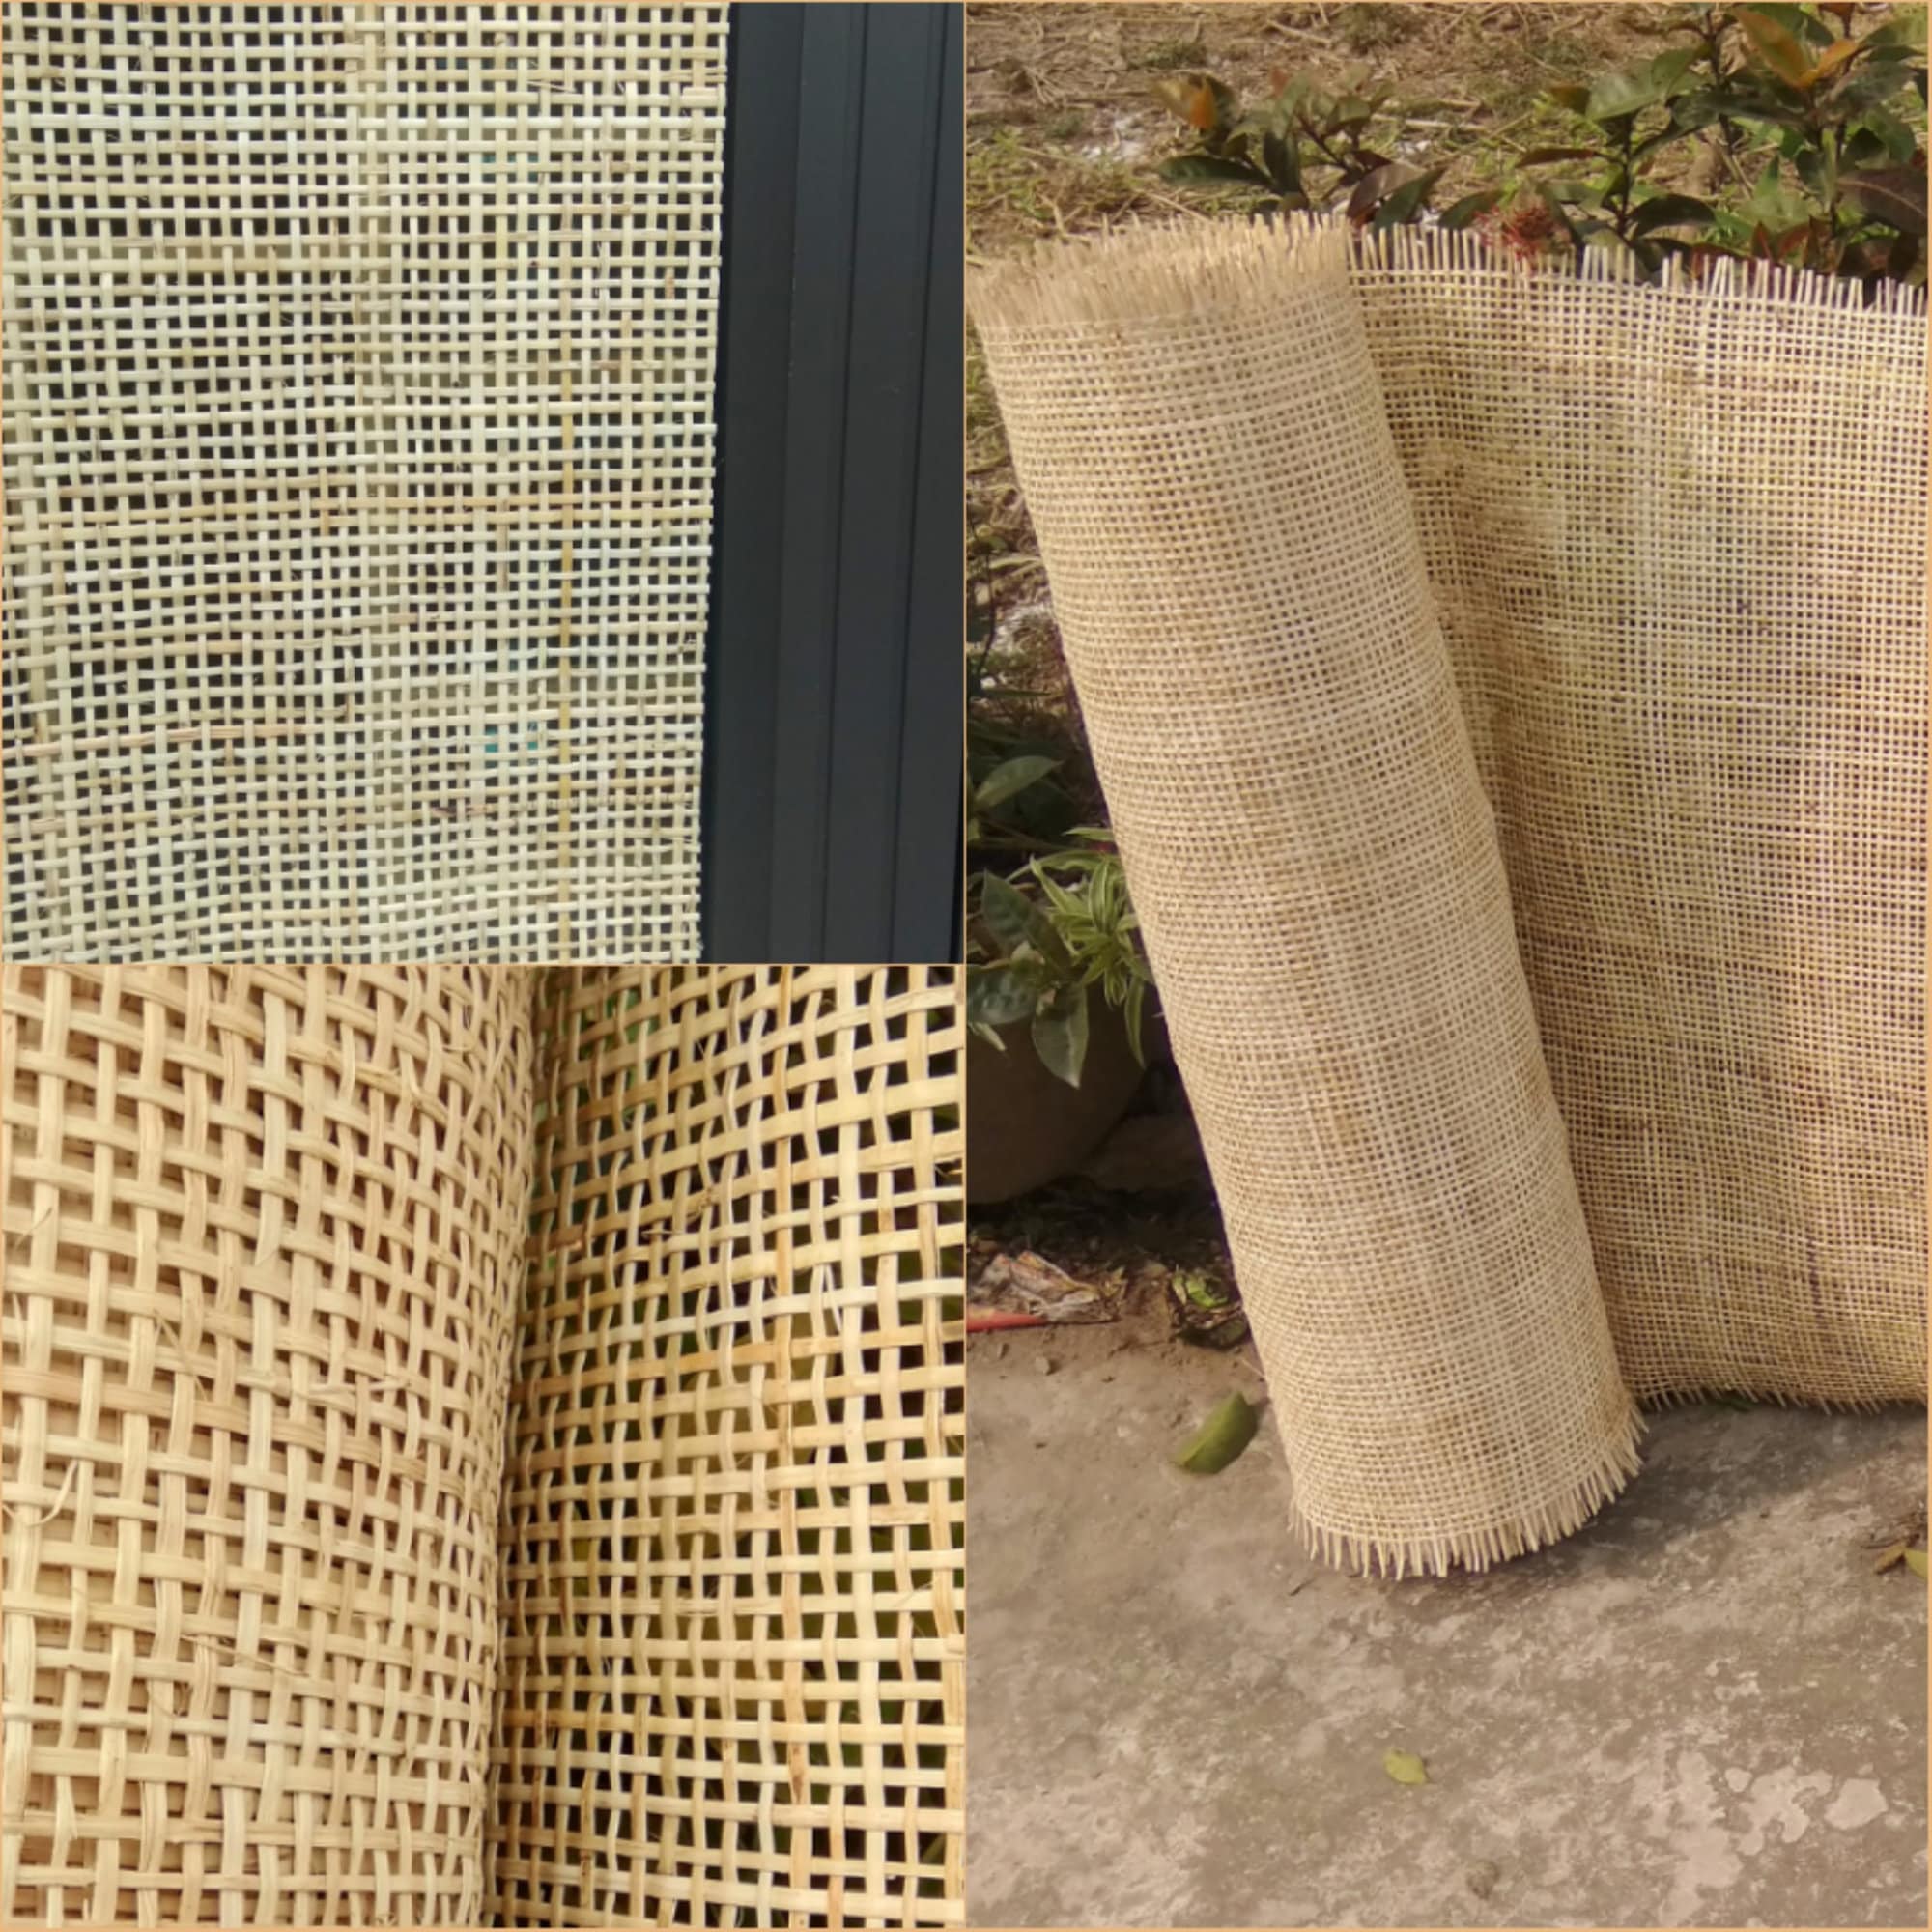 UNBLEACHED Natural Rattan Cane Webbing,pre-woven,18 Wide,open 1/2